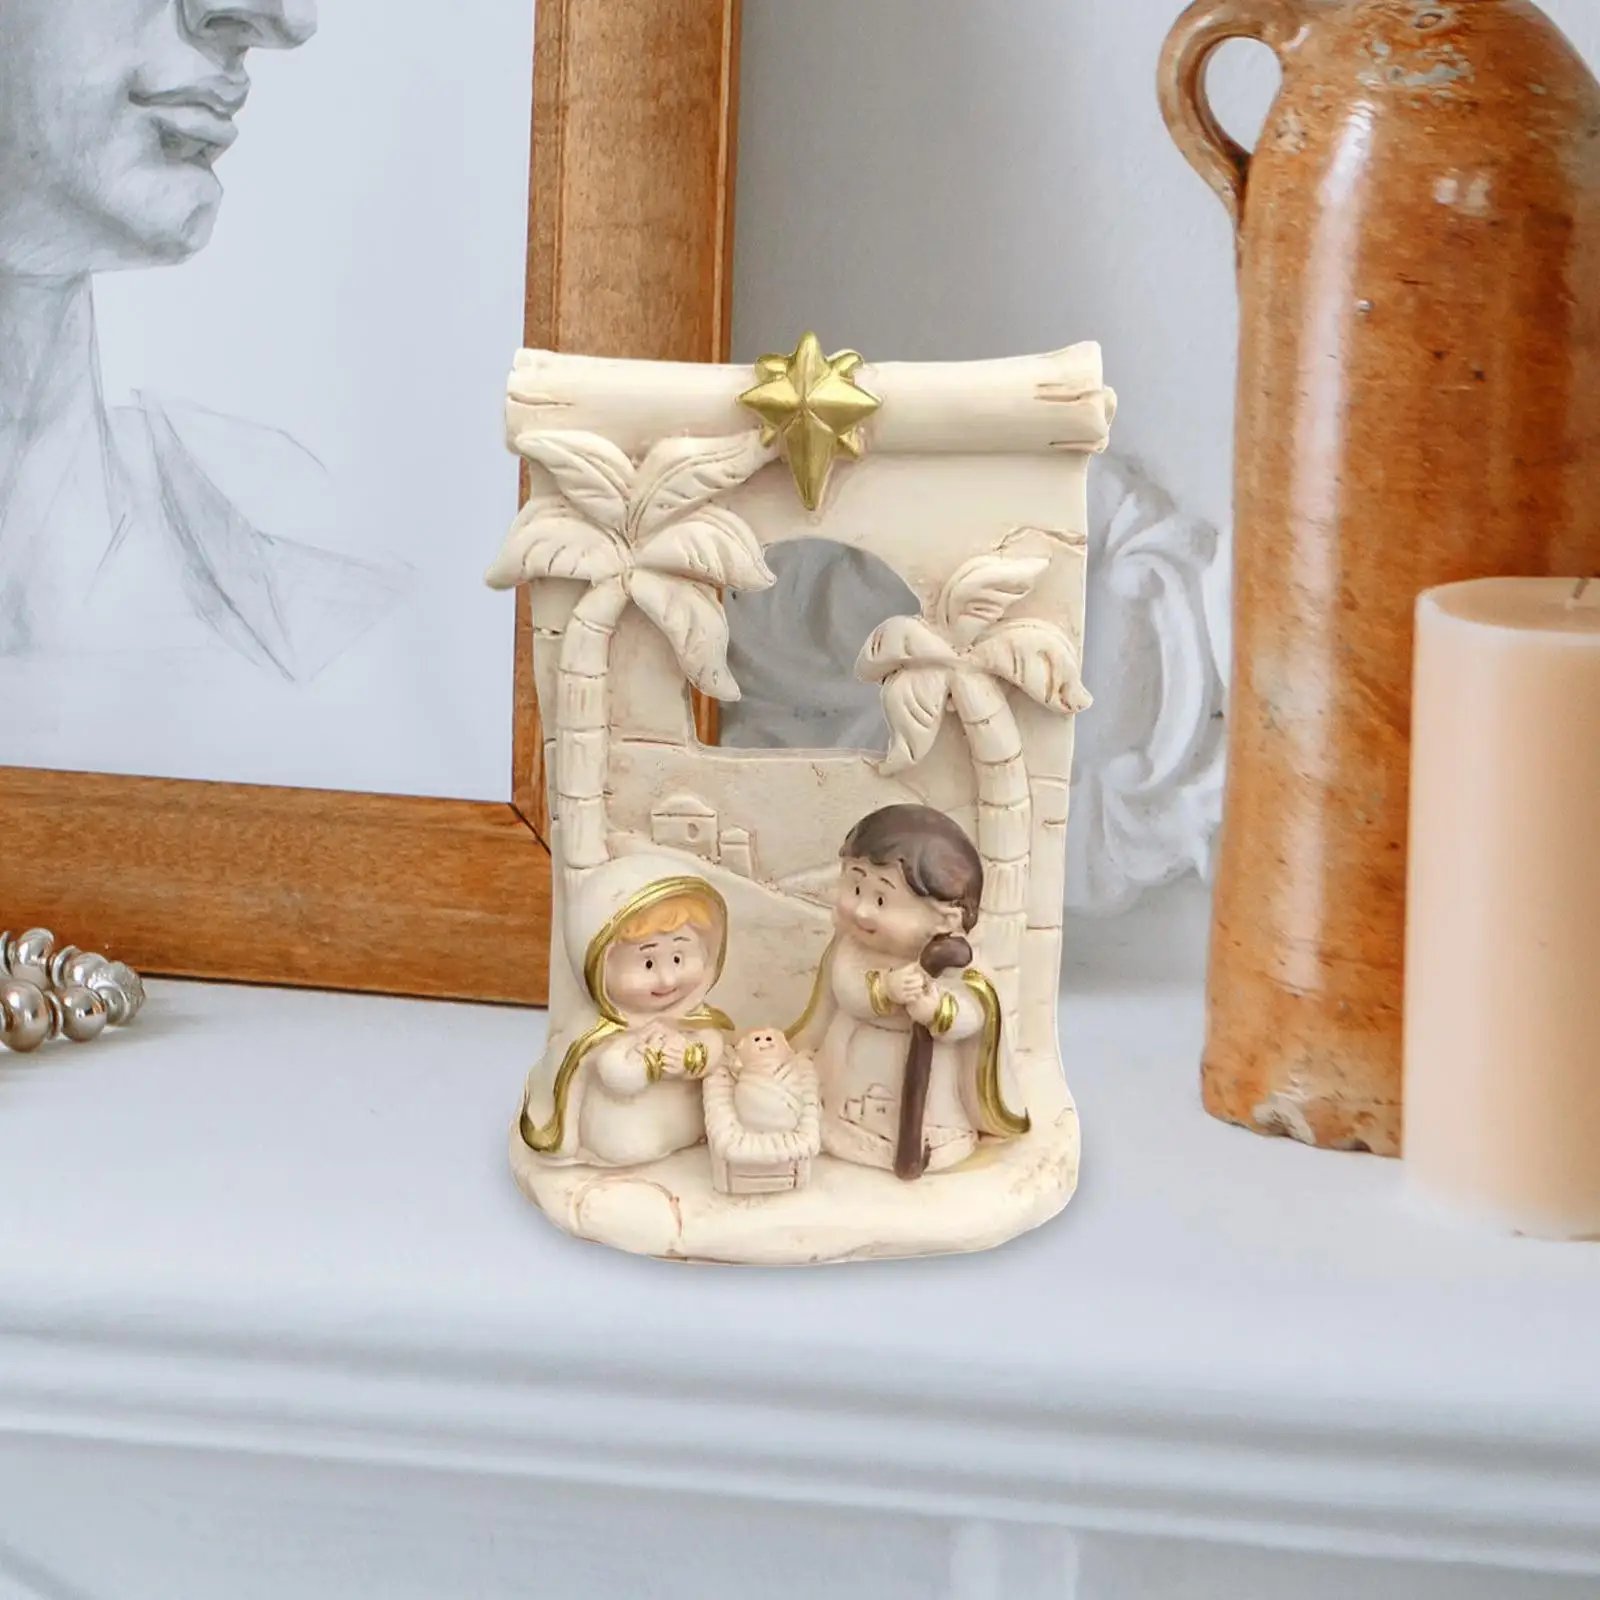 Resin Holy Family Figure Birth of Jesus Scene Collection for Christmas Gifts